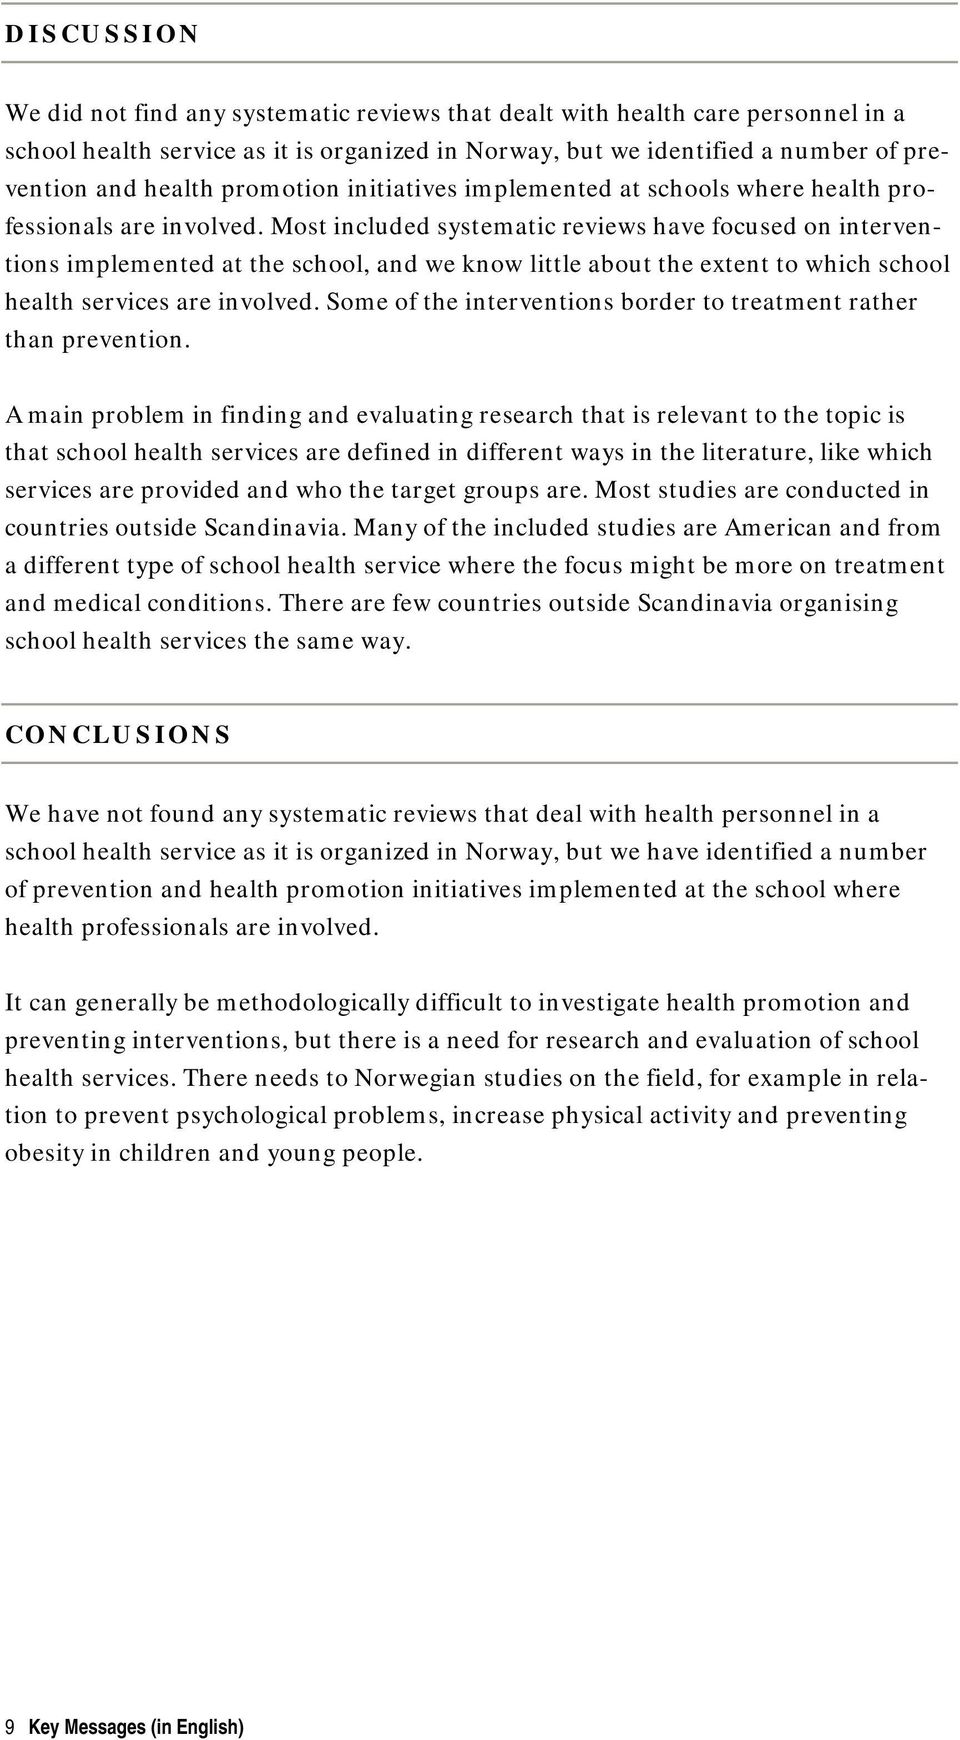 Most included systematic reviews have focused on interventions implemented at the school, and we know little about the extent to which school health services are involved.